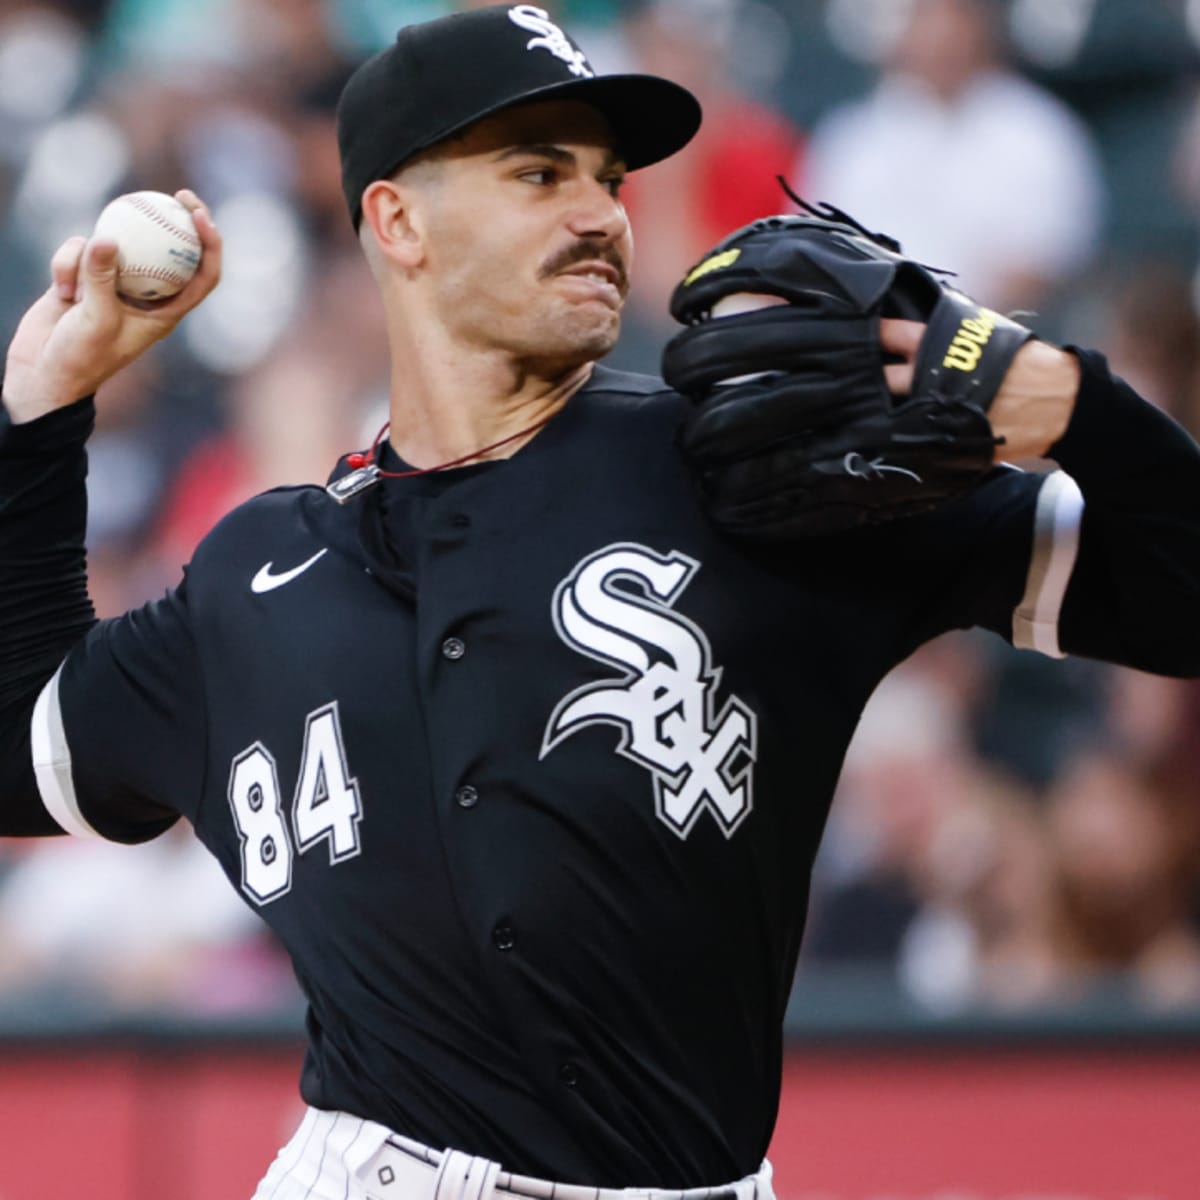 Locked On MLB - “I think the White Sox come out firing after that